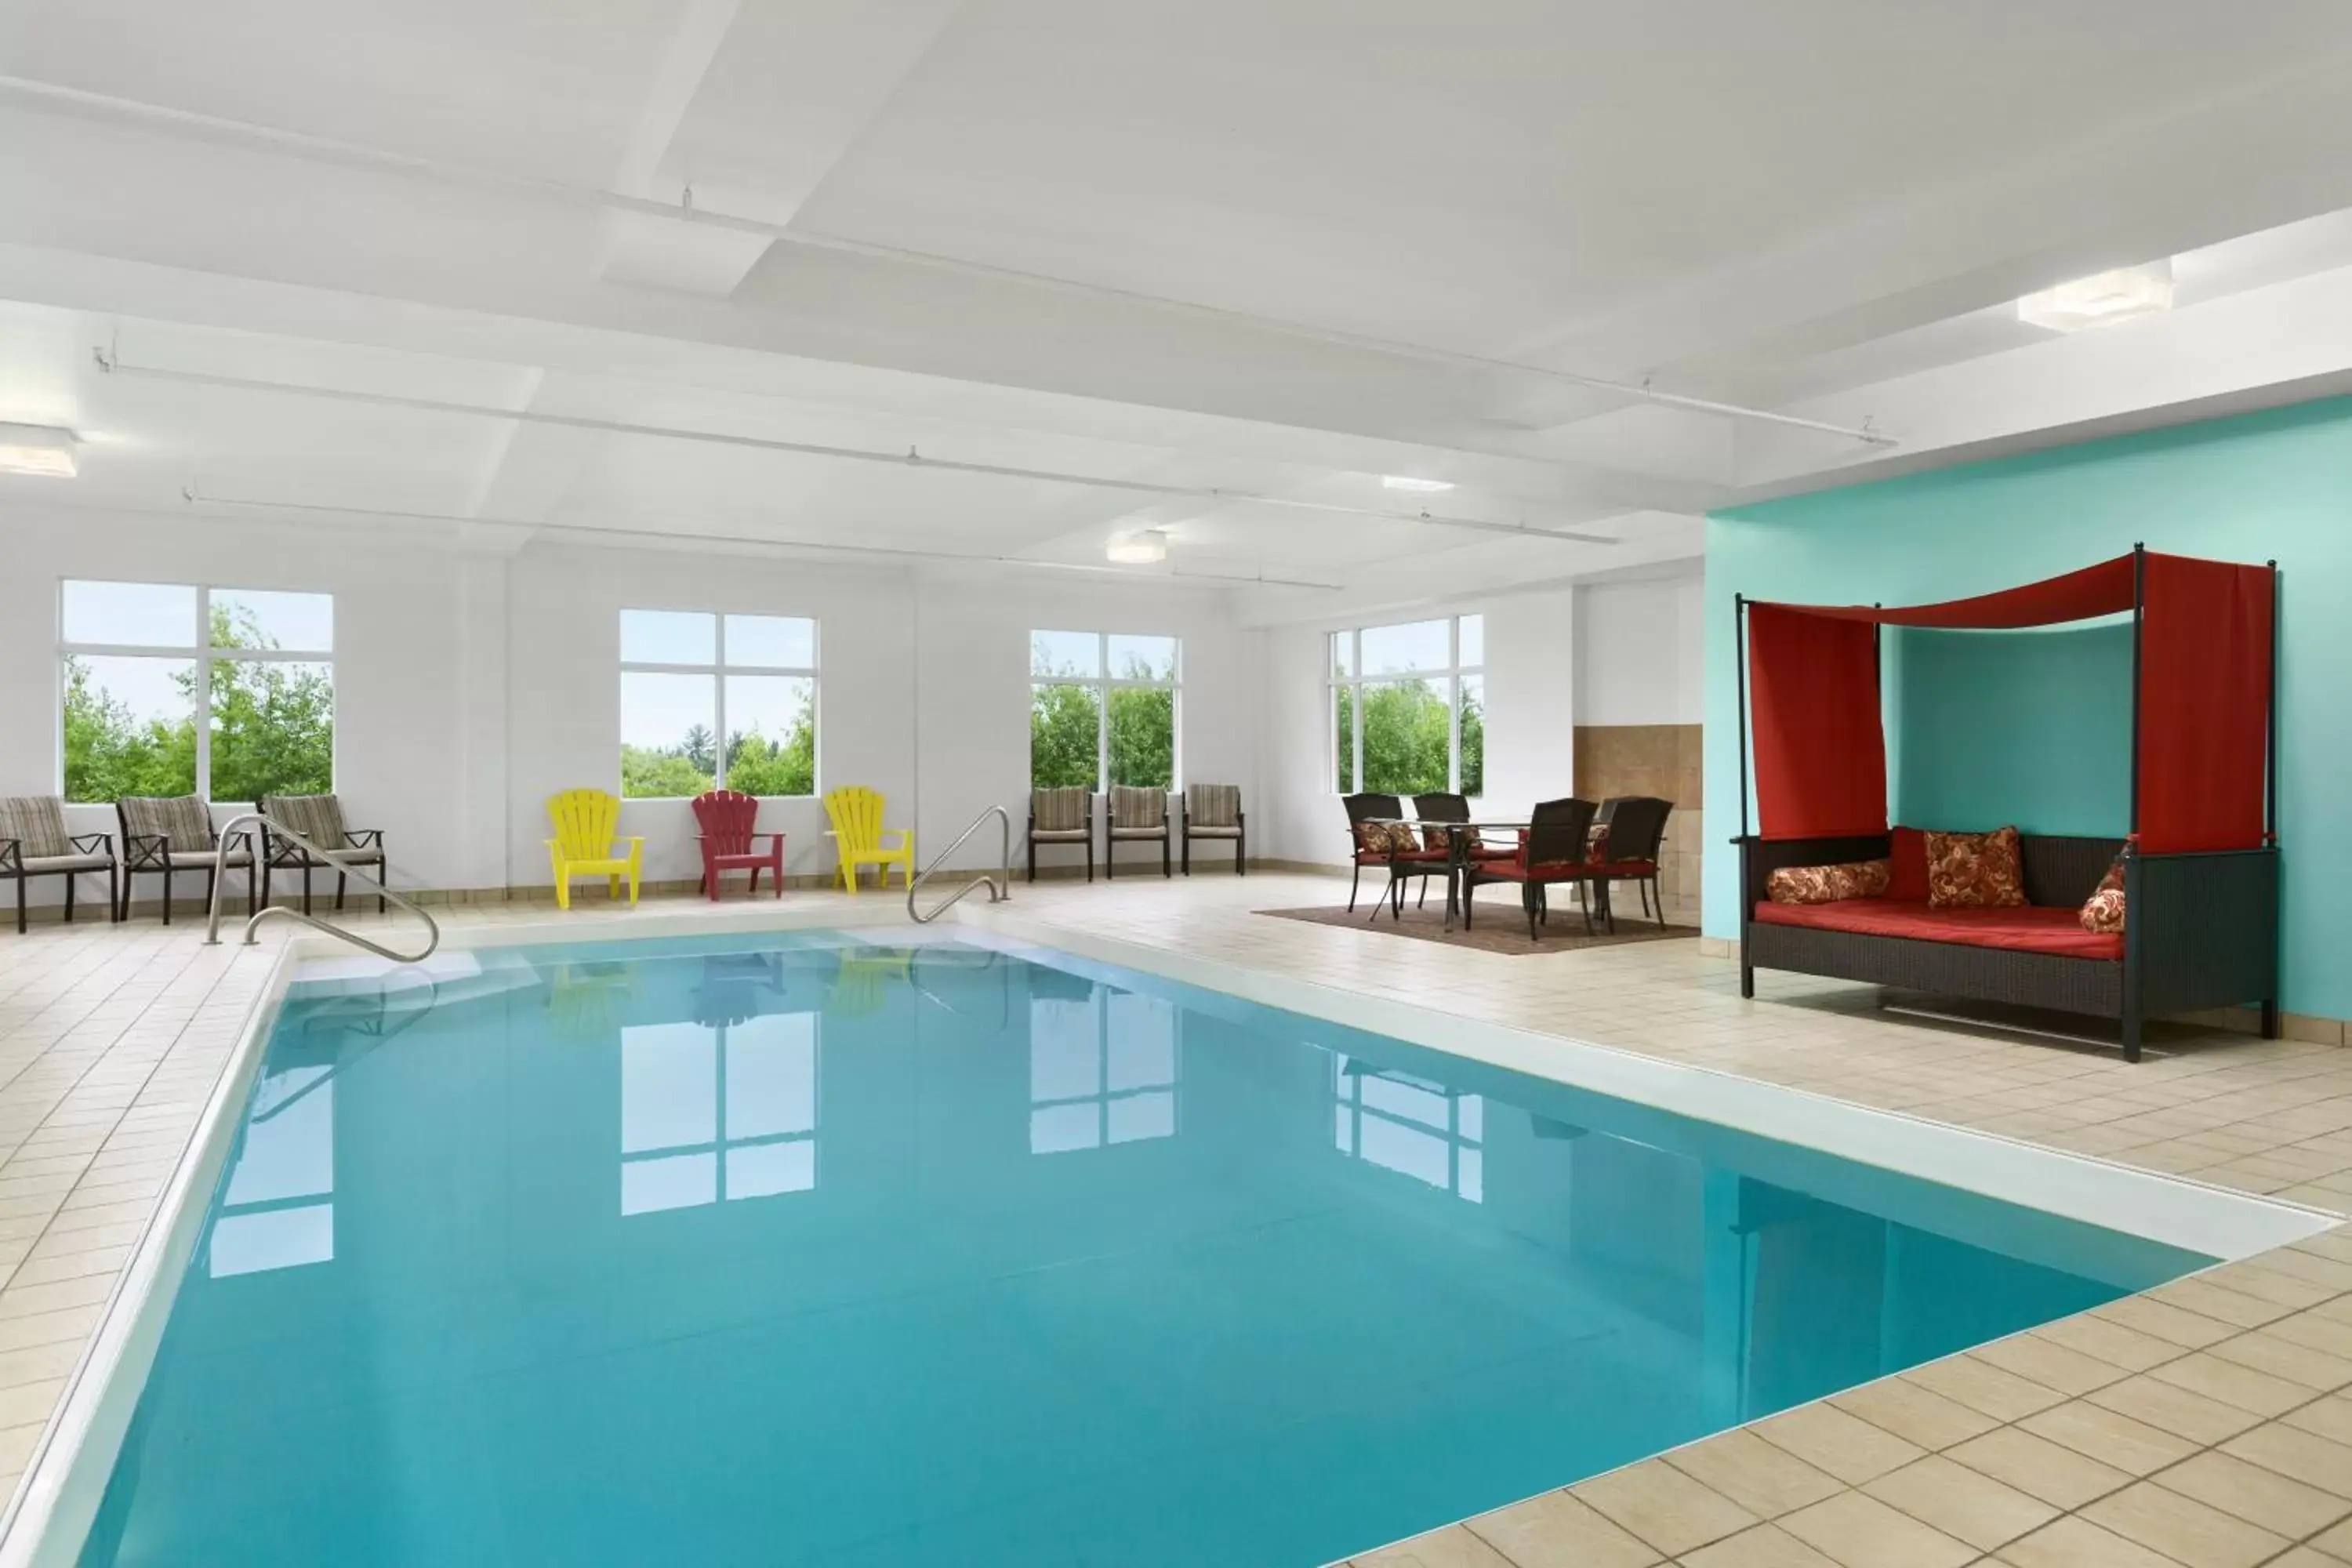 Day, Swimming Pool in Days Inn by Wyndham Oromocto Conference Centre